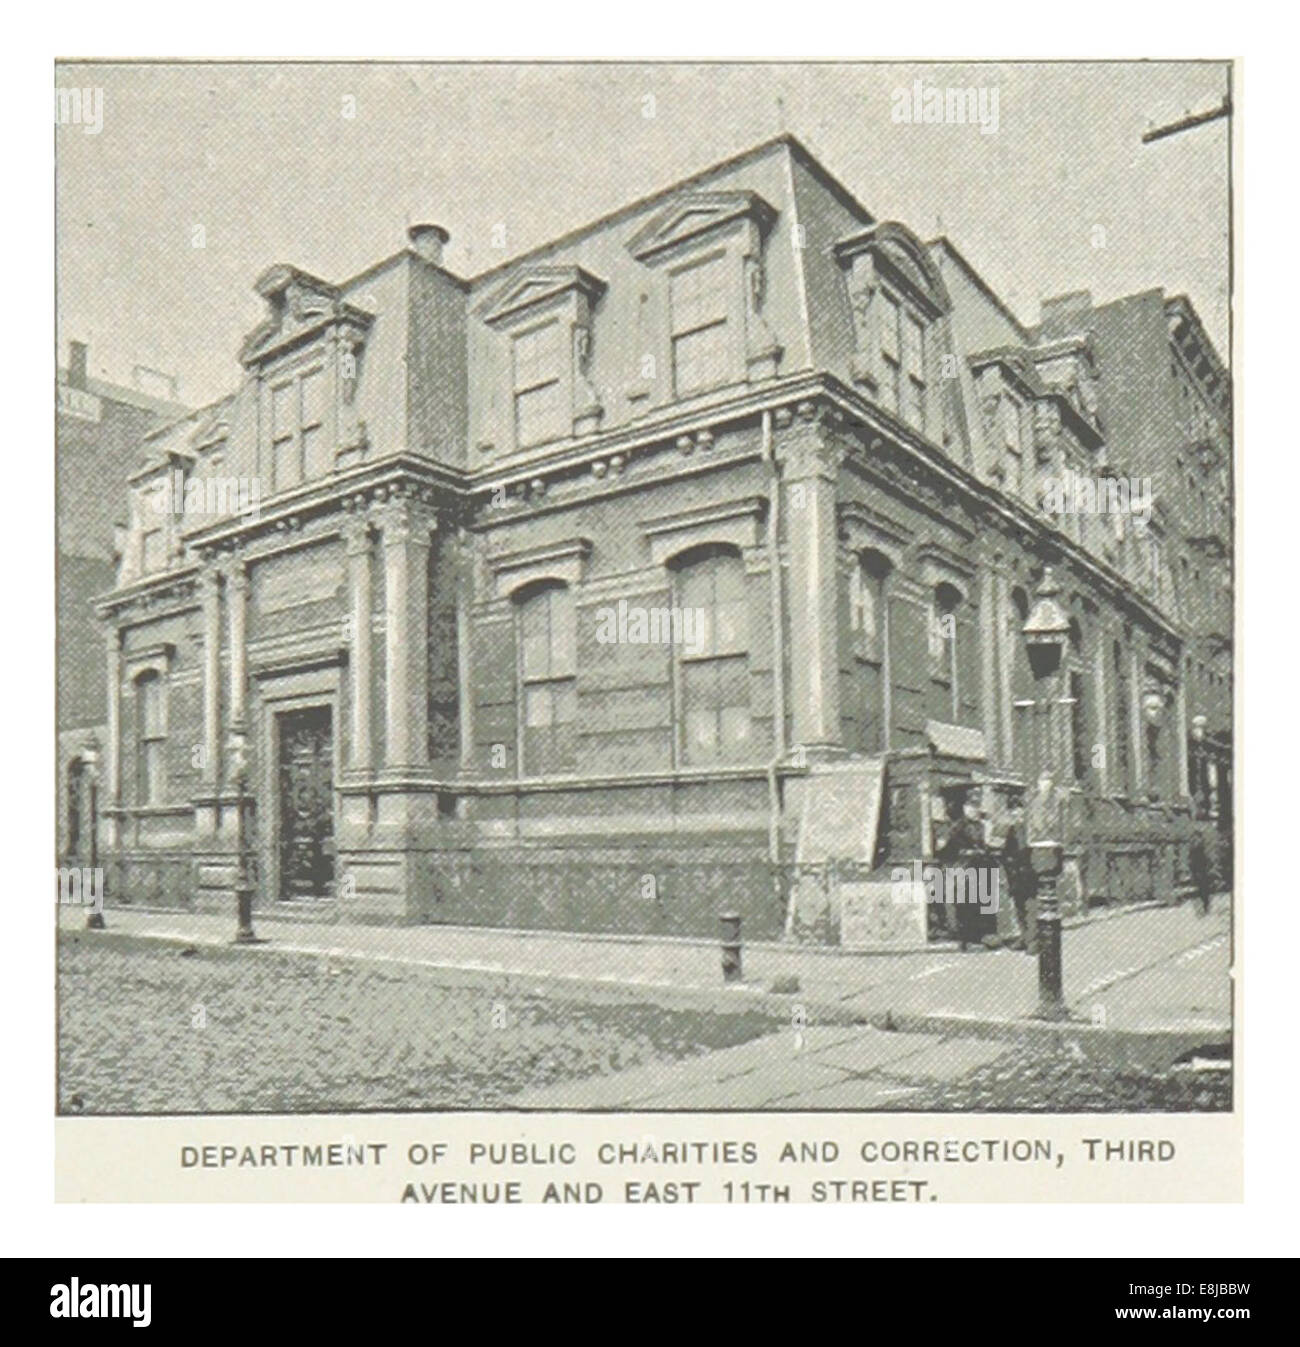 (King1893NYC) pg427 DEPARTMENT OF PUBLIC CHARITIES AND CORRECTION,THIRD AVENUE AND EAST 11TH STREET Stock Photo